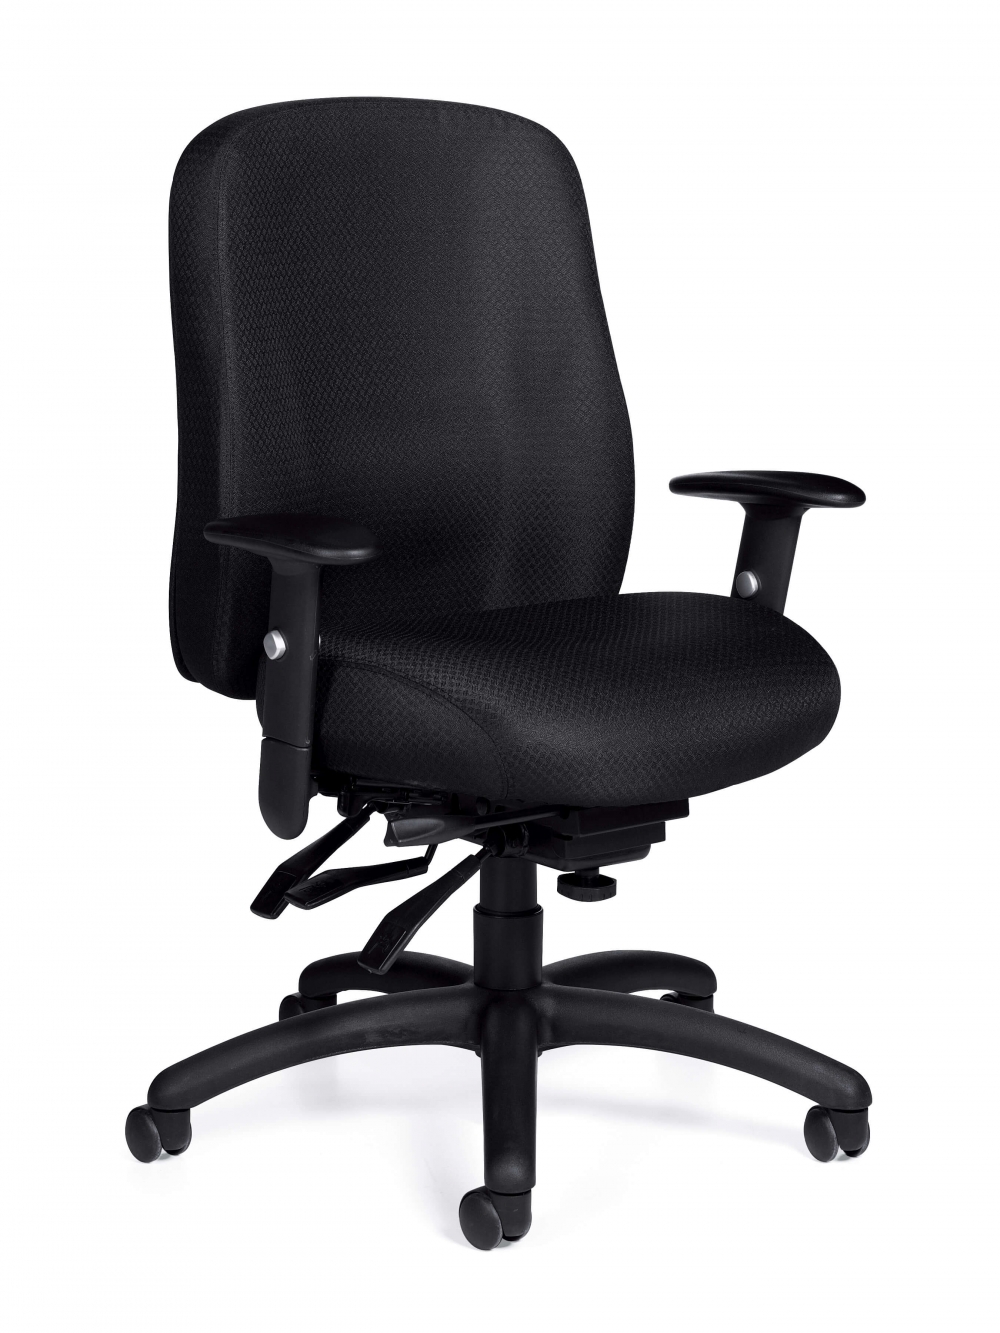 office-furniture-chairs-upholstered-desk-chair.jpg